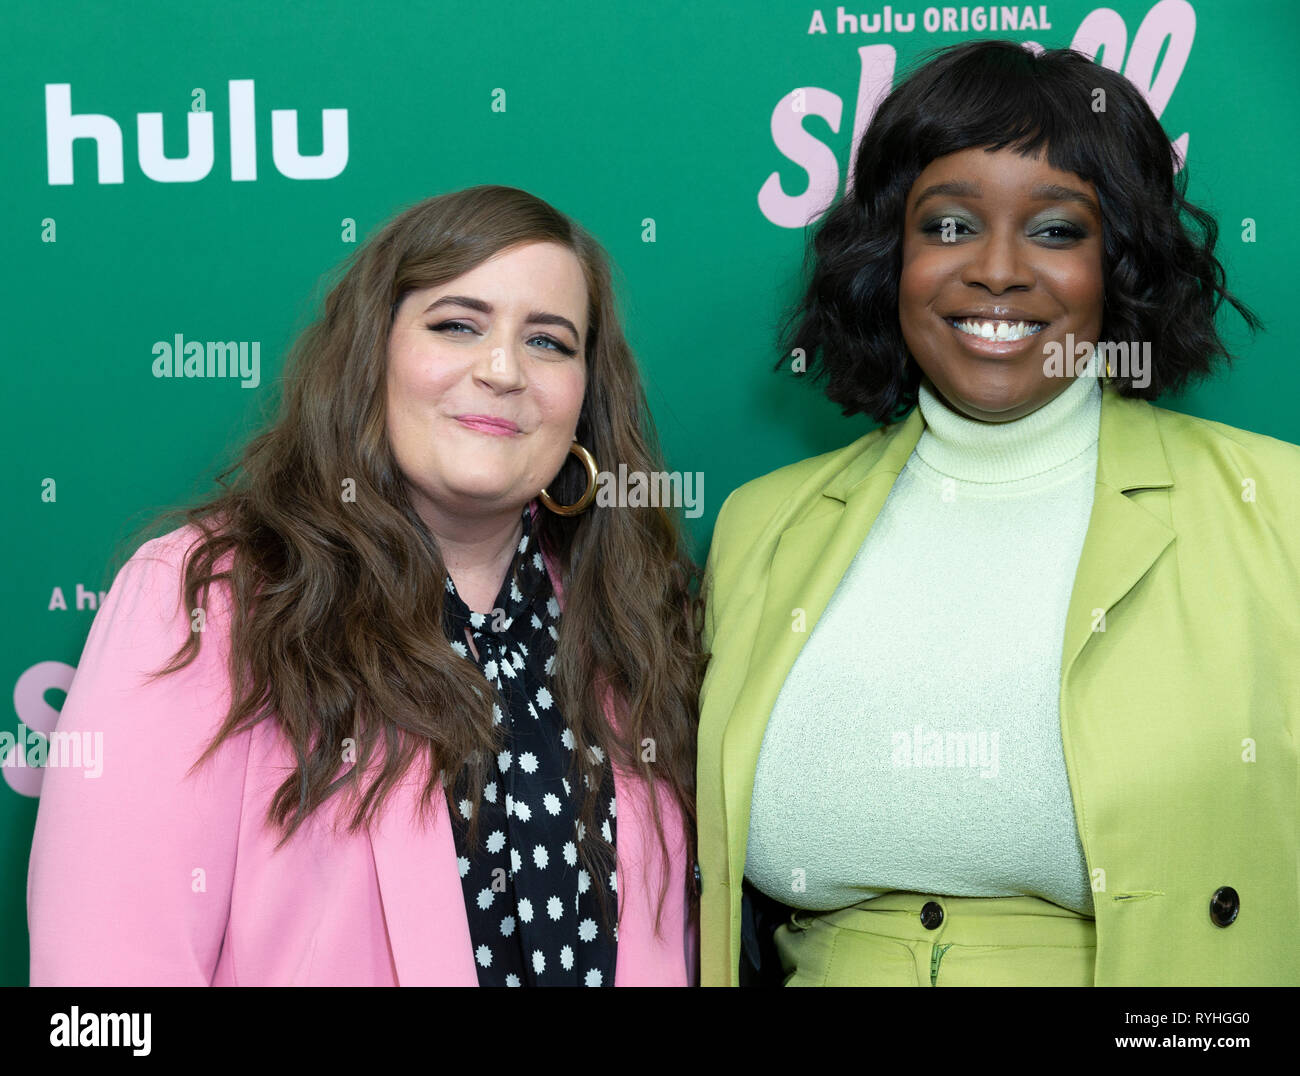 New York, United States. 13th Mar, 2019. New York, NY - March 13, 2019: Aidy Bryant, Lolly Adefope attends New York Hulu Shrill premiere screening at Walter Reade Theater of Lincoln Center Credit: lev radin/Alamy Live News Stock Photo